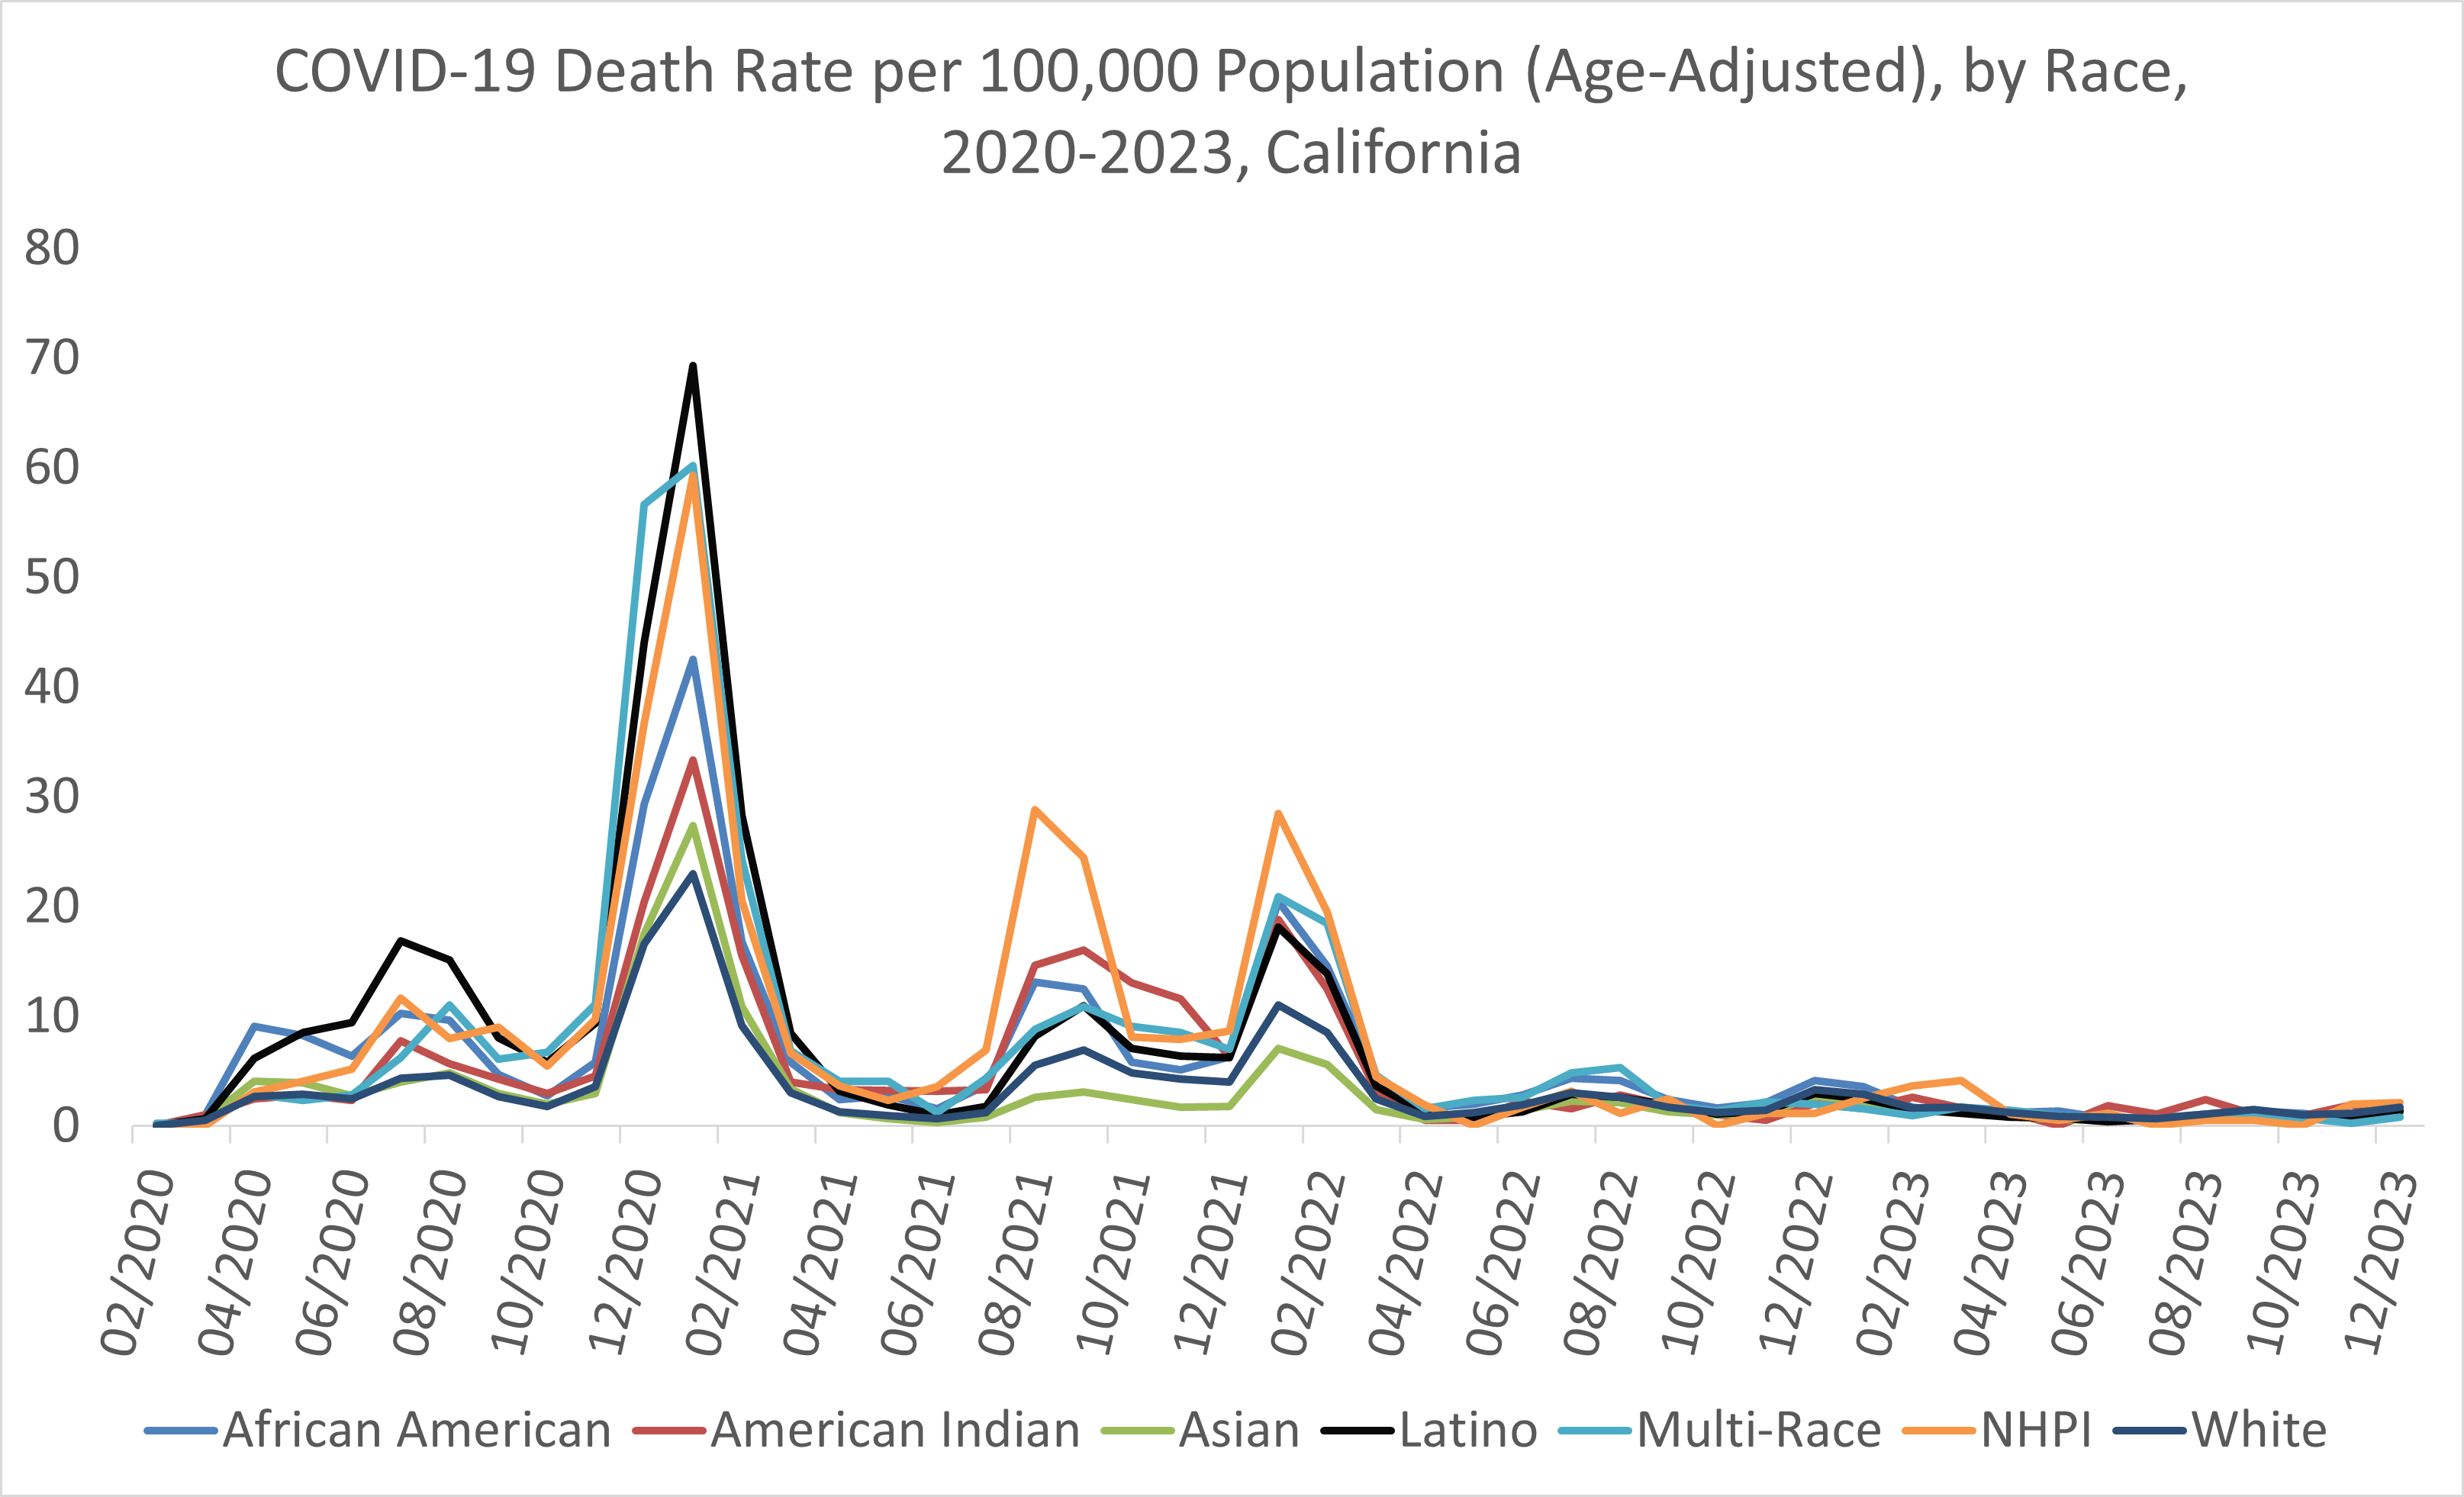 COVID-19 Death Rate per 100,000 Population (Age-Adjusted), by Race, 2020-2023, California 